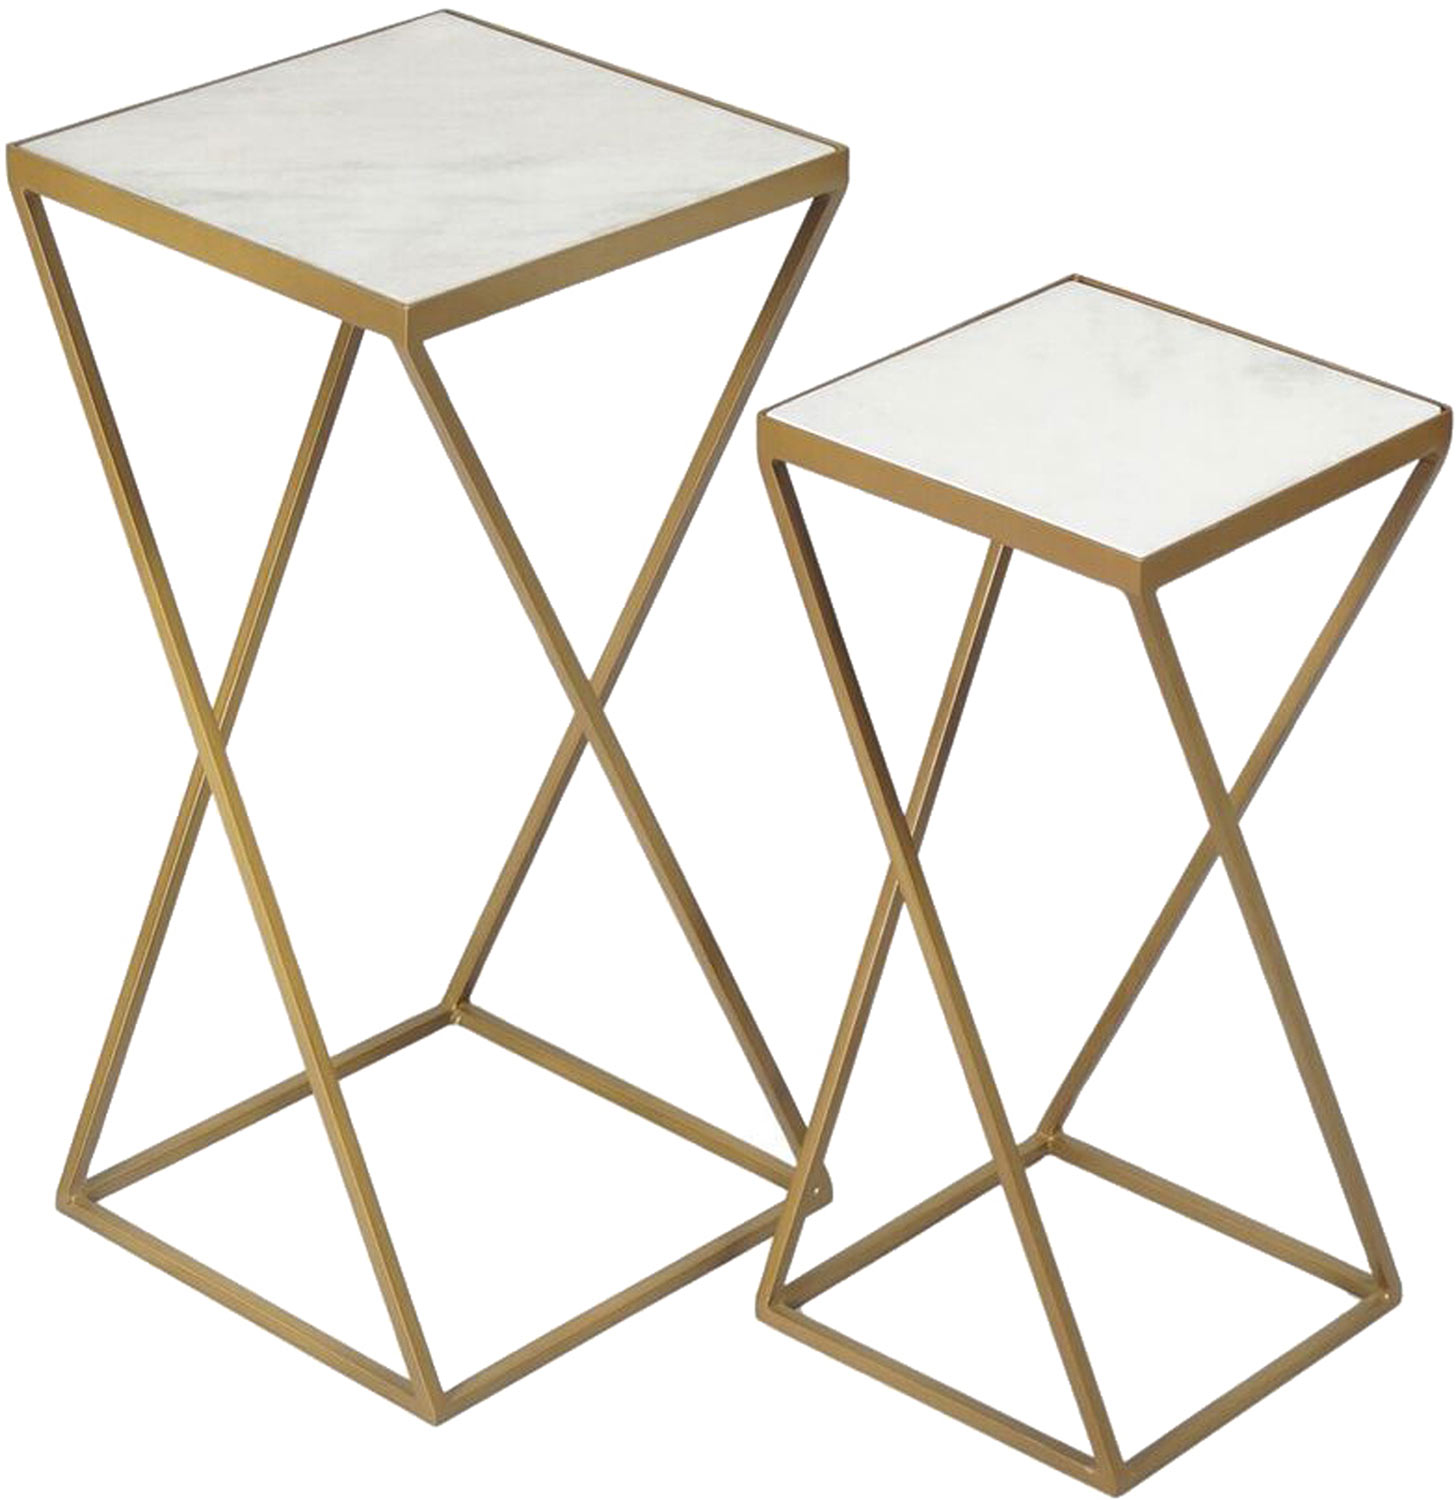 Ren-Wil Darby Accent Table - Gold Powdercoated